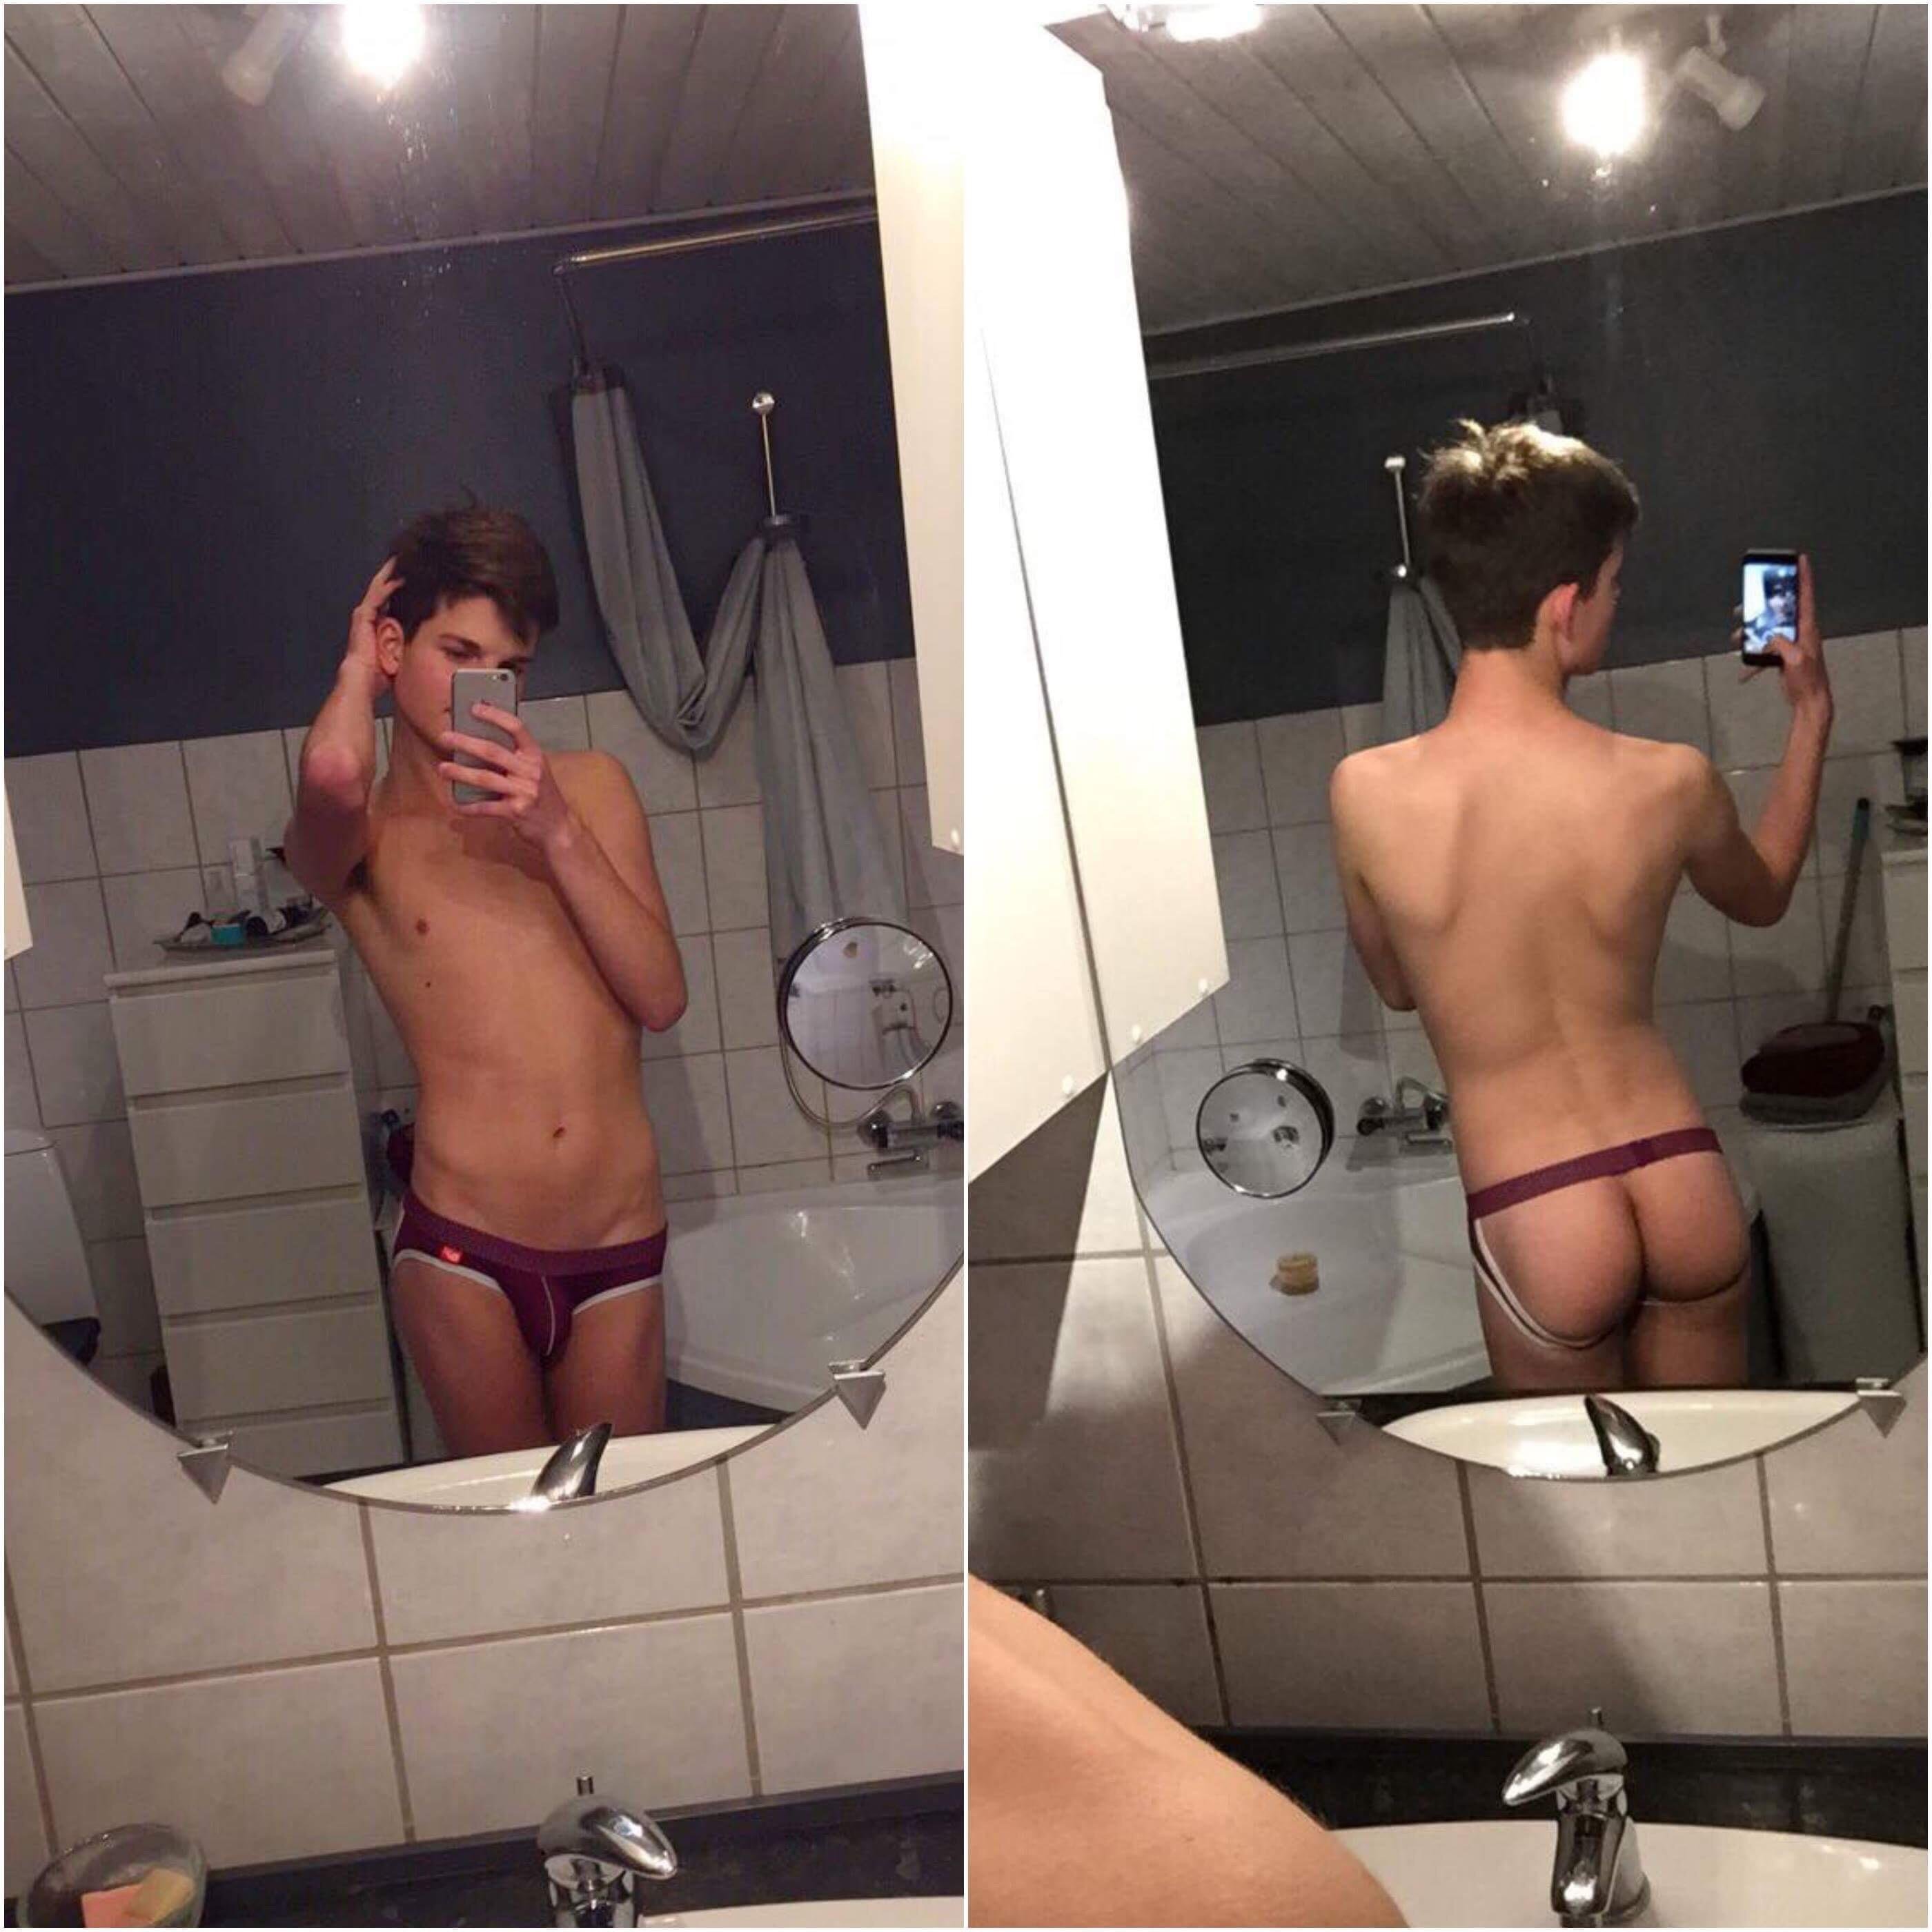 Here’s both the front and the back for ya ;)